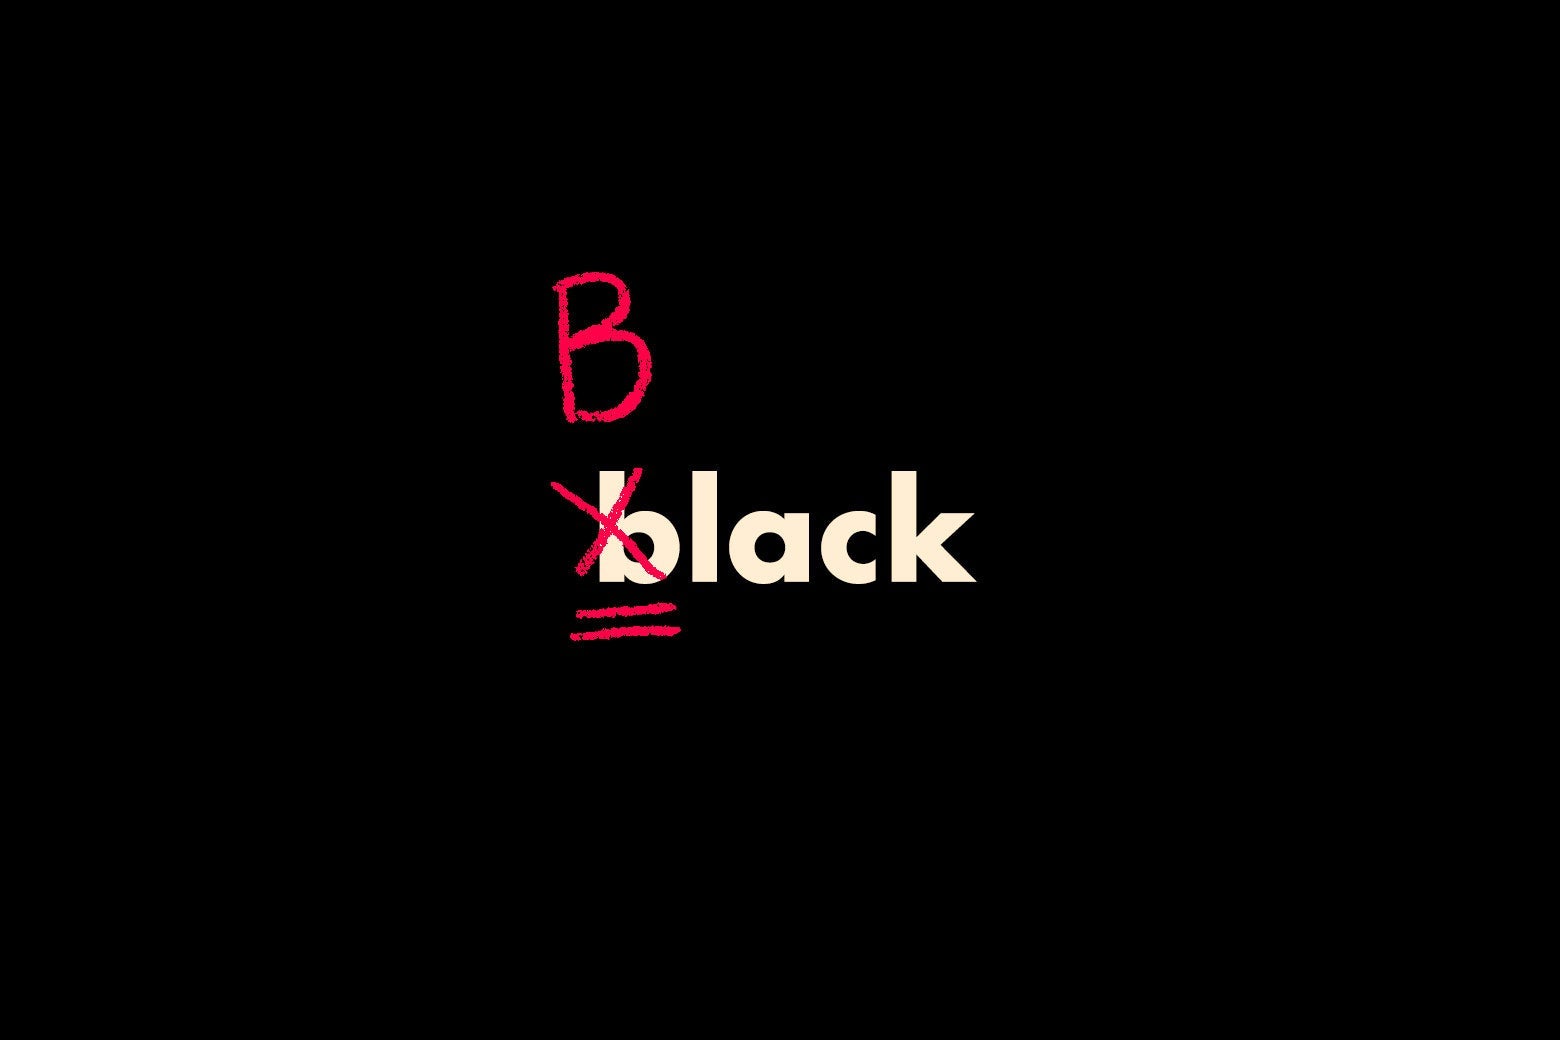 On a black background, white letters spell out "black" in lowercase, while red copy editing marks cross out the small b and the beginning and replace it with a capital B. 